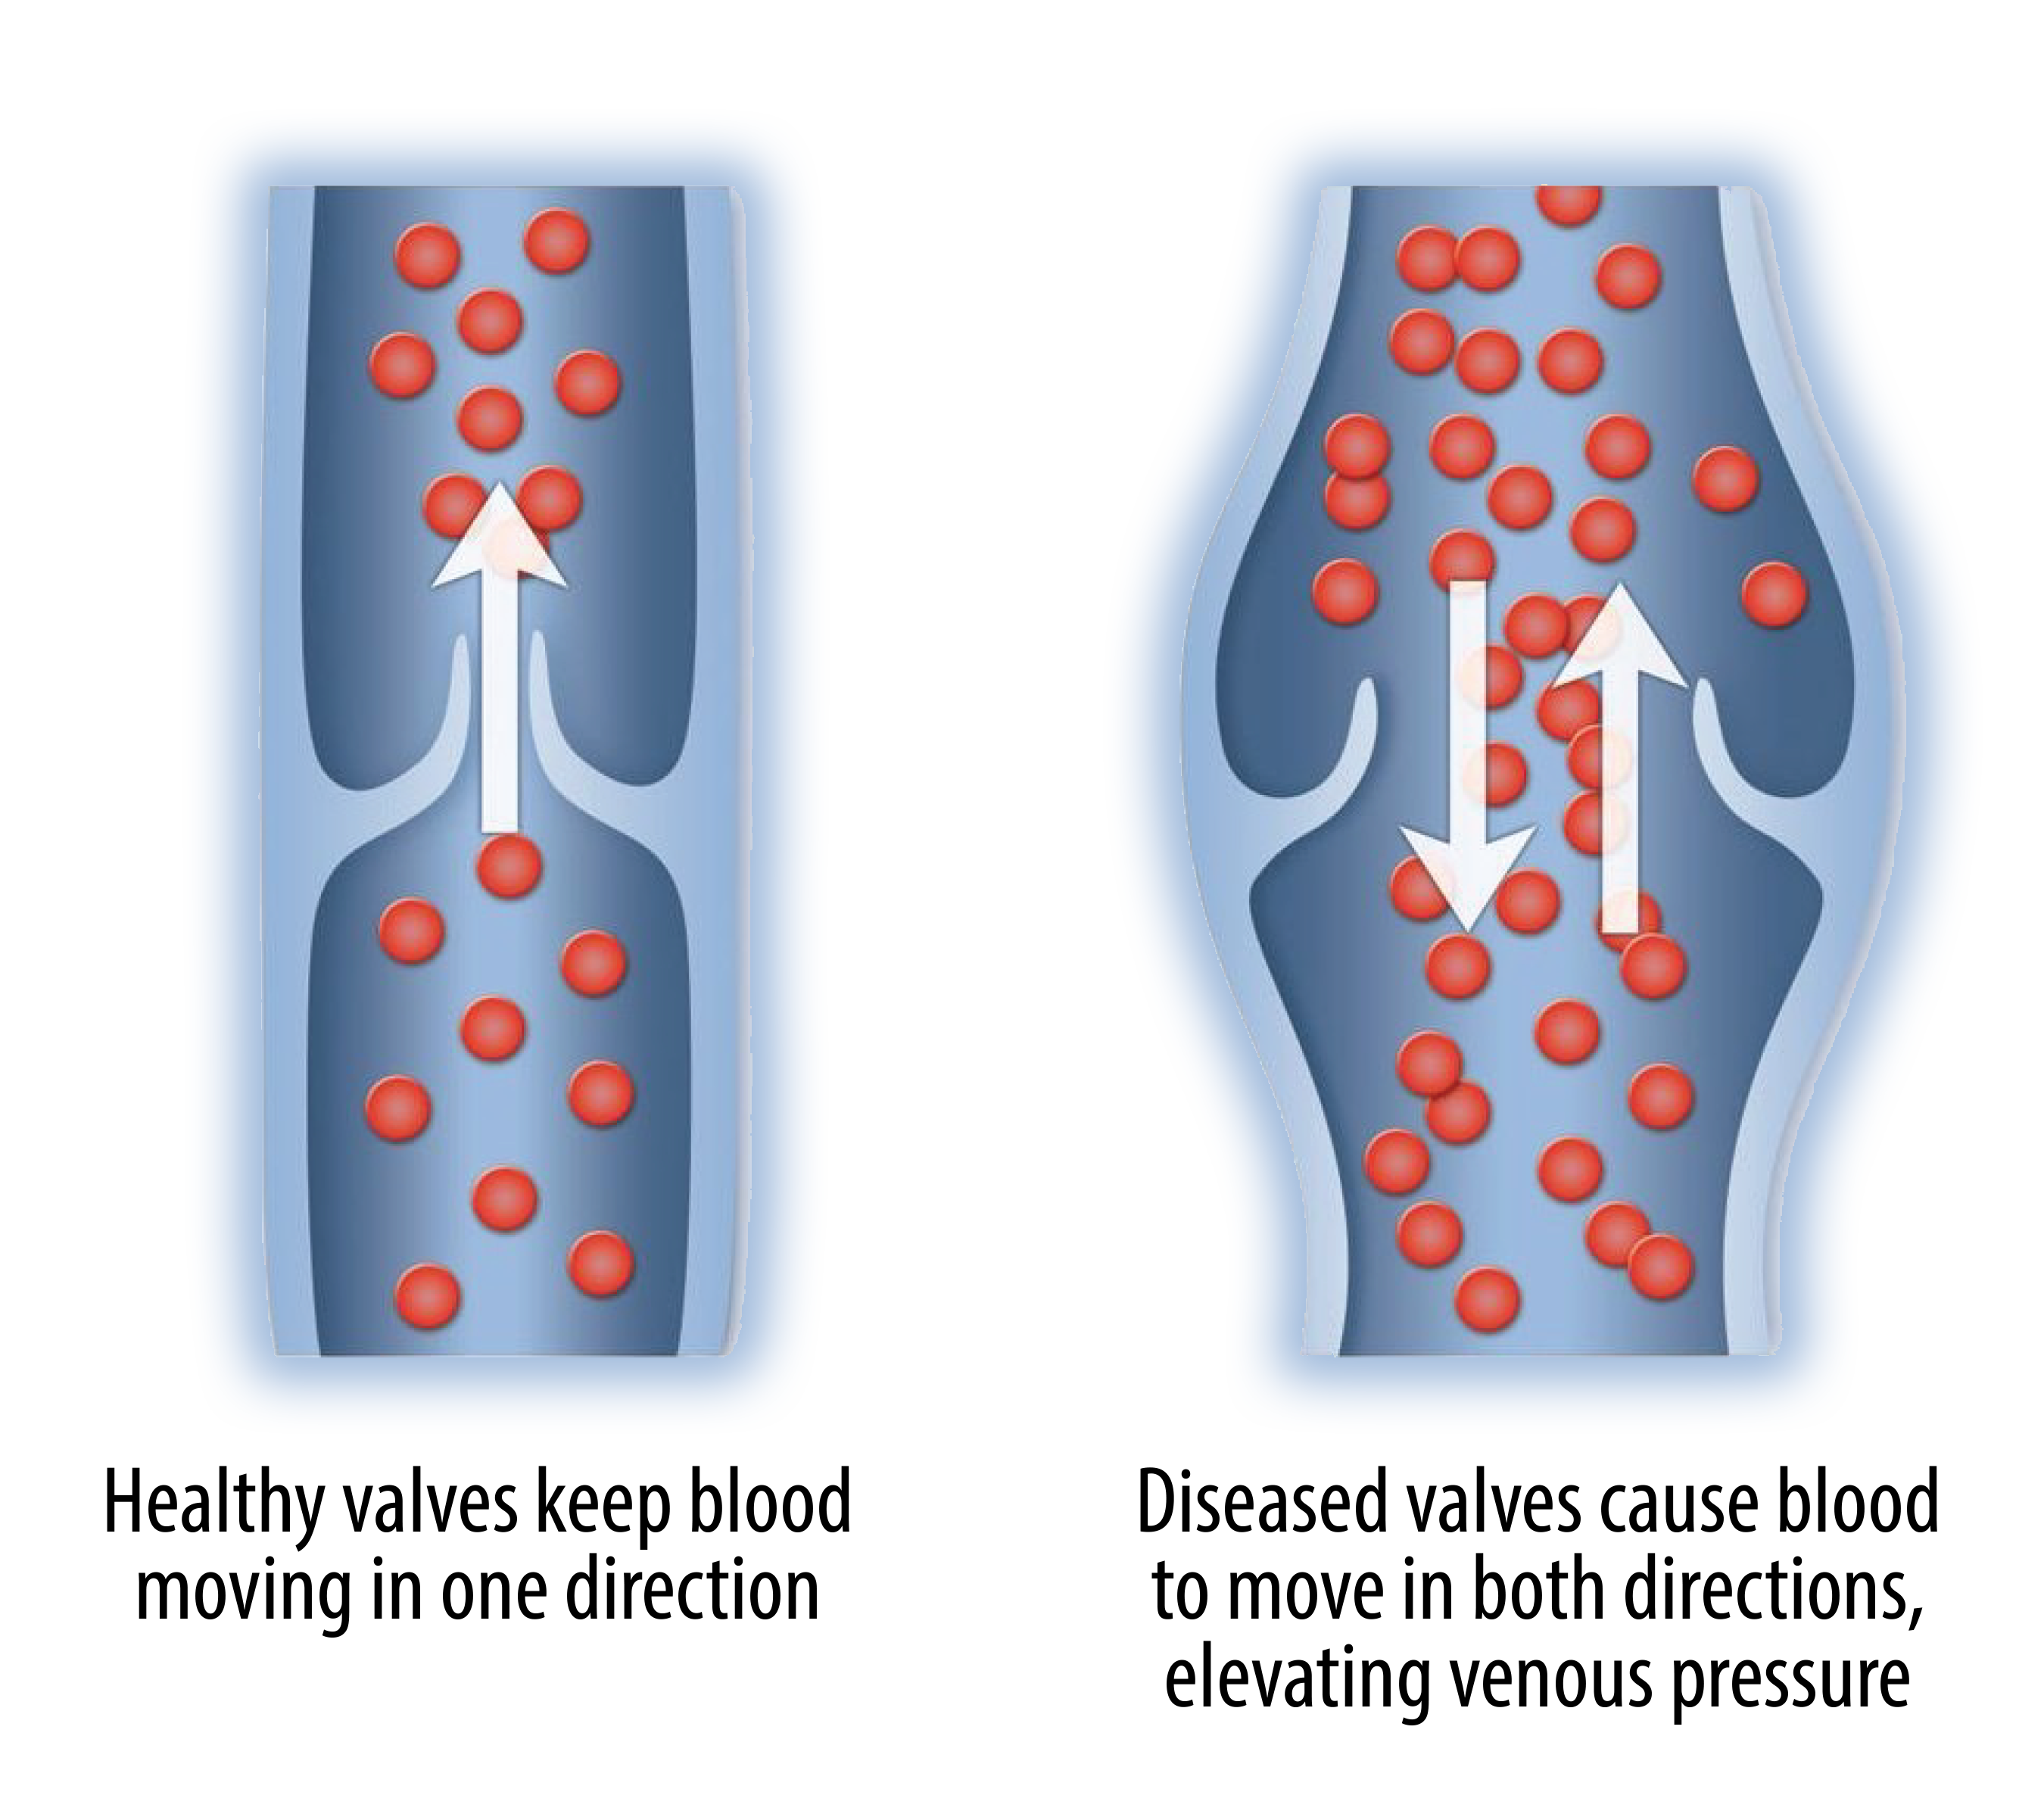 An illustration of the difference between healthy and swollen veins that could be treated through vessel ablation or vein ablation.